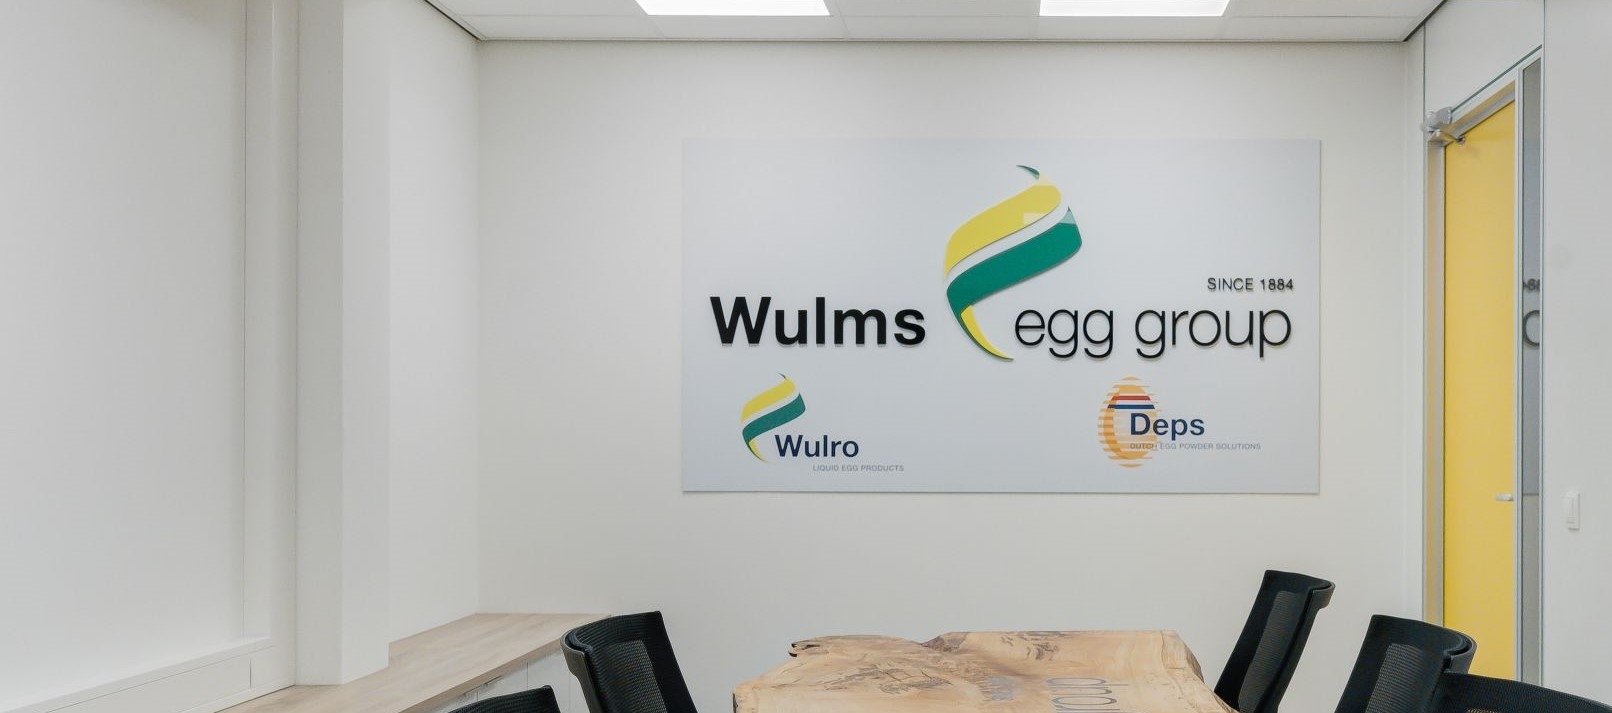 Wulms Egg Group General terms and conditions